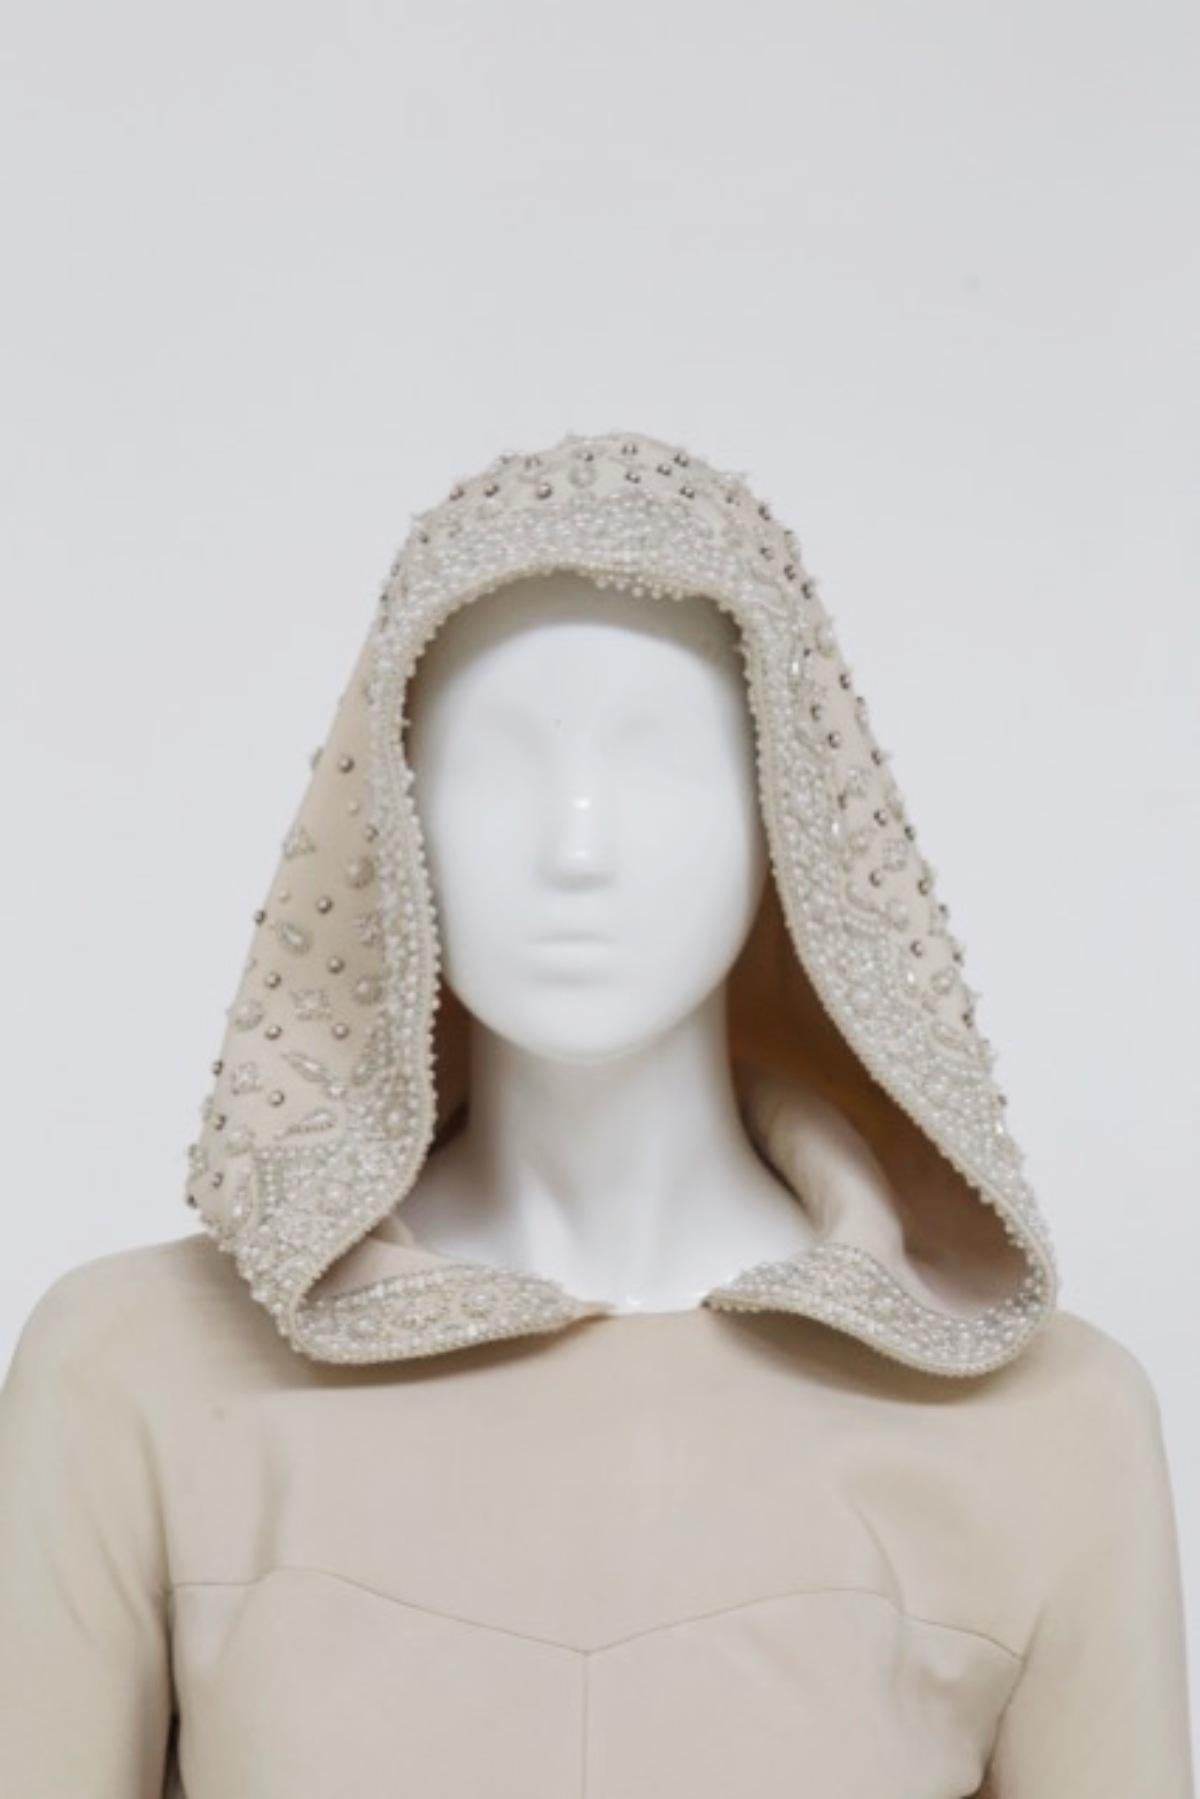 Mazzuchelli Vintage Sartorial Hooded Dress w Beading In Good Condition For Sale In Milano, IT